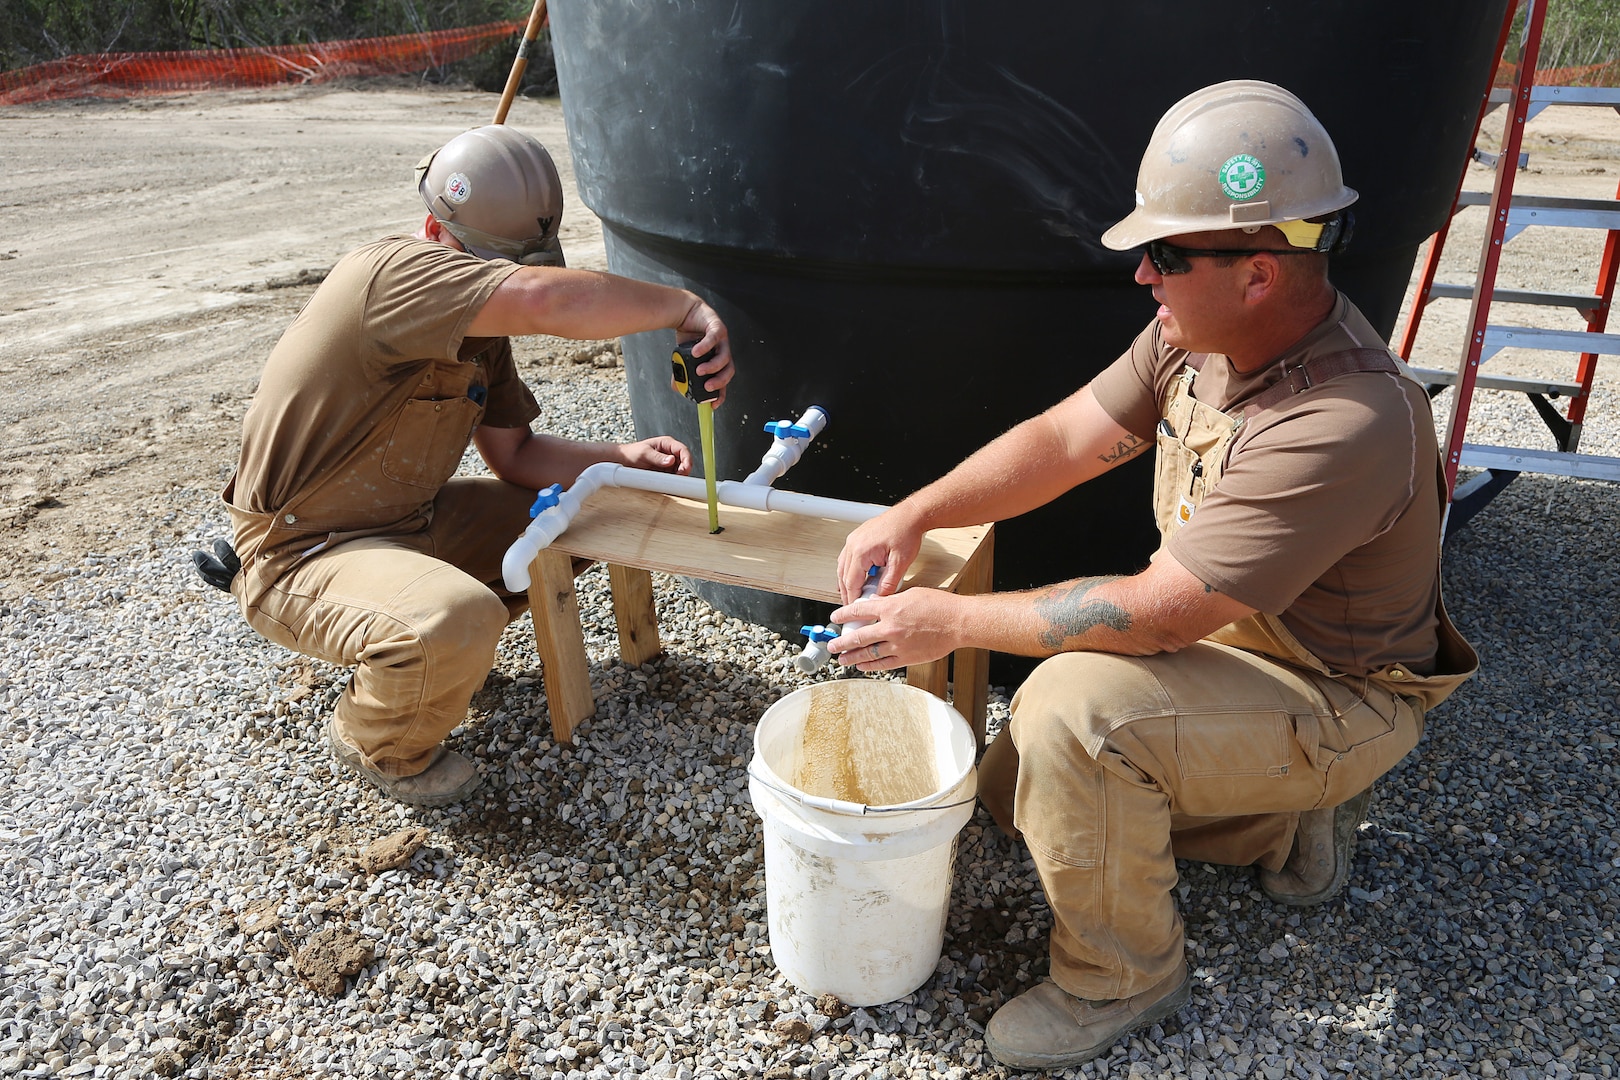 U.S. Navy Seabees take a measurement in Riohacha, Colombia, Sept. 27, 2018, during water-well drilling exploration operations as part of Southern Partnership Station 2018